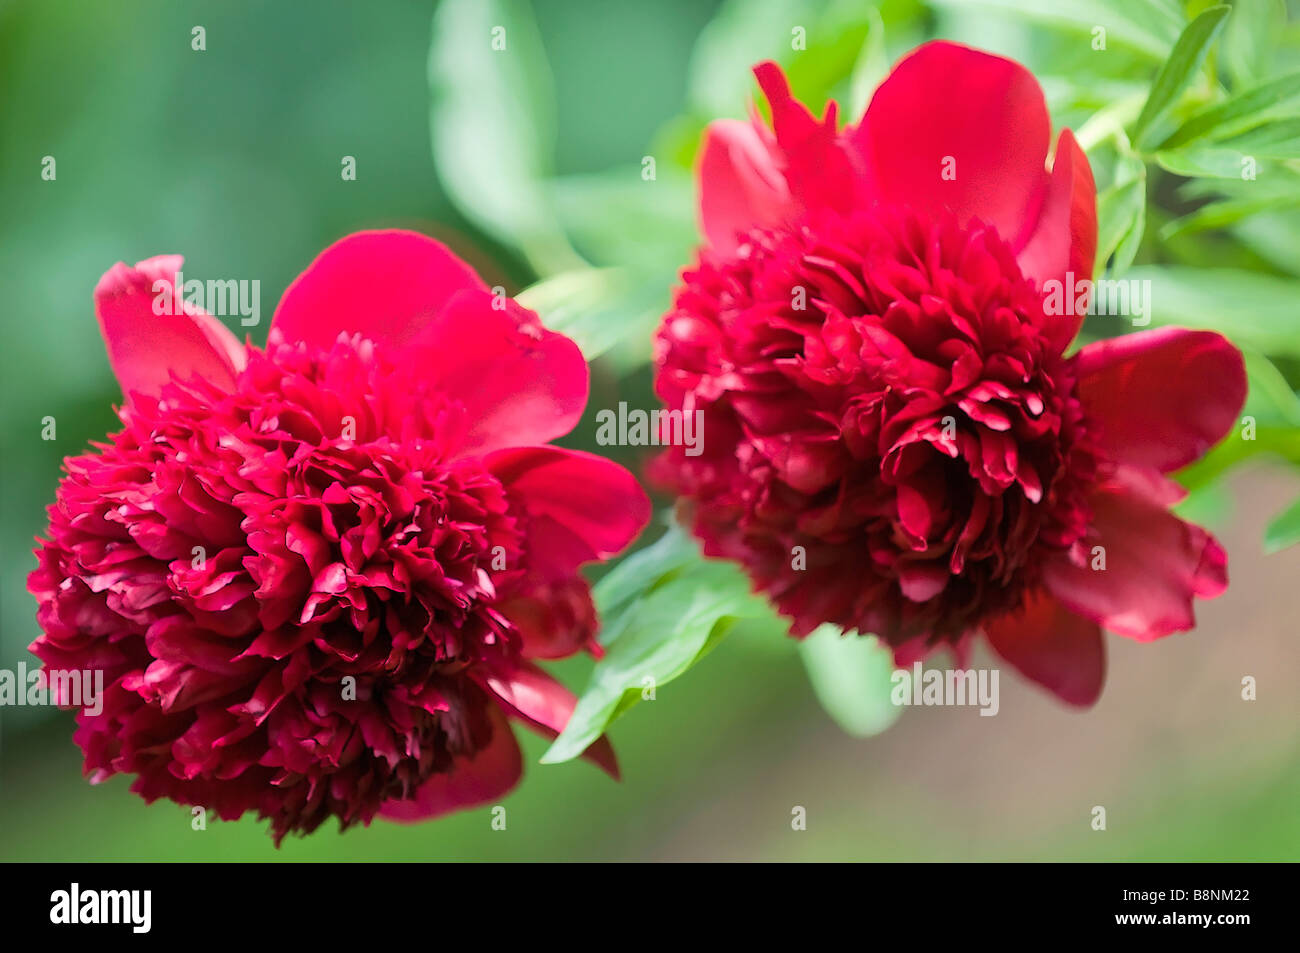 Two Double Red Peonies in Bloom in Spring Garden Stock Photo